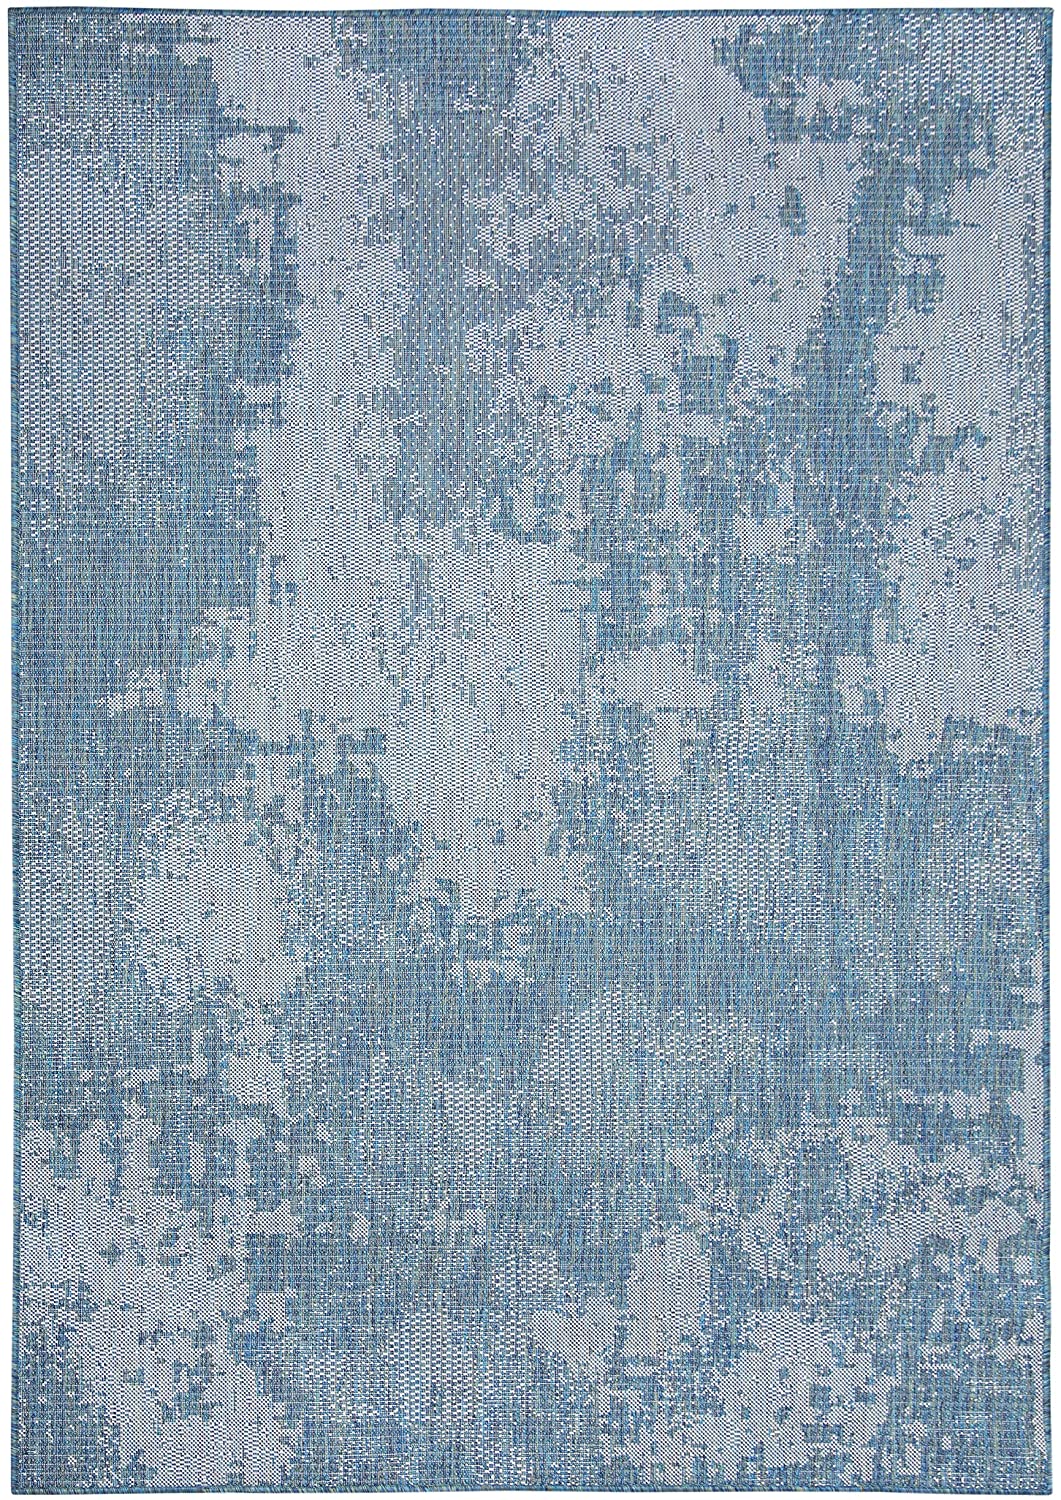 Abstract Vintage Rug - 5 ft. 3 in. x 7 ft. 6 in., Ocean, Indoor/Outdoor Area Rug with Distressed Pattern, Stain Resistant, Washable Rug | Stylish Area Rugs - image 1 of 8